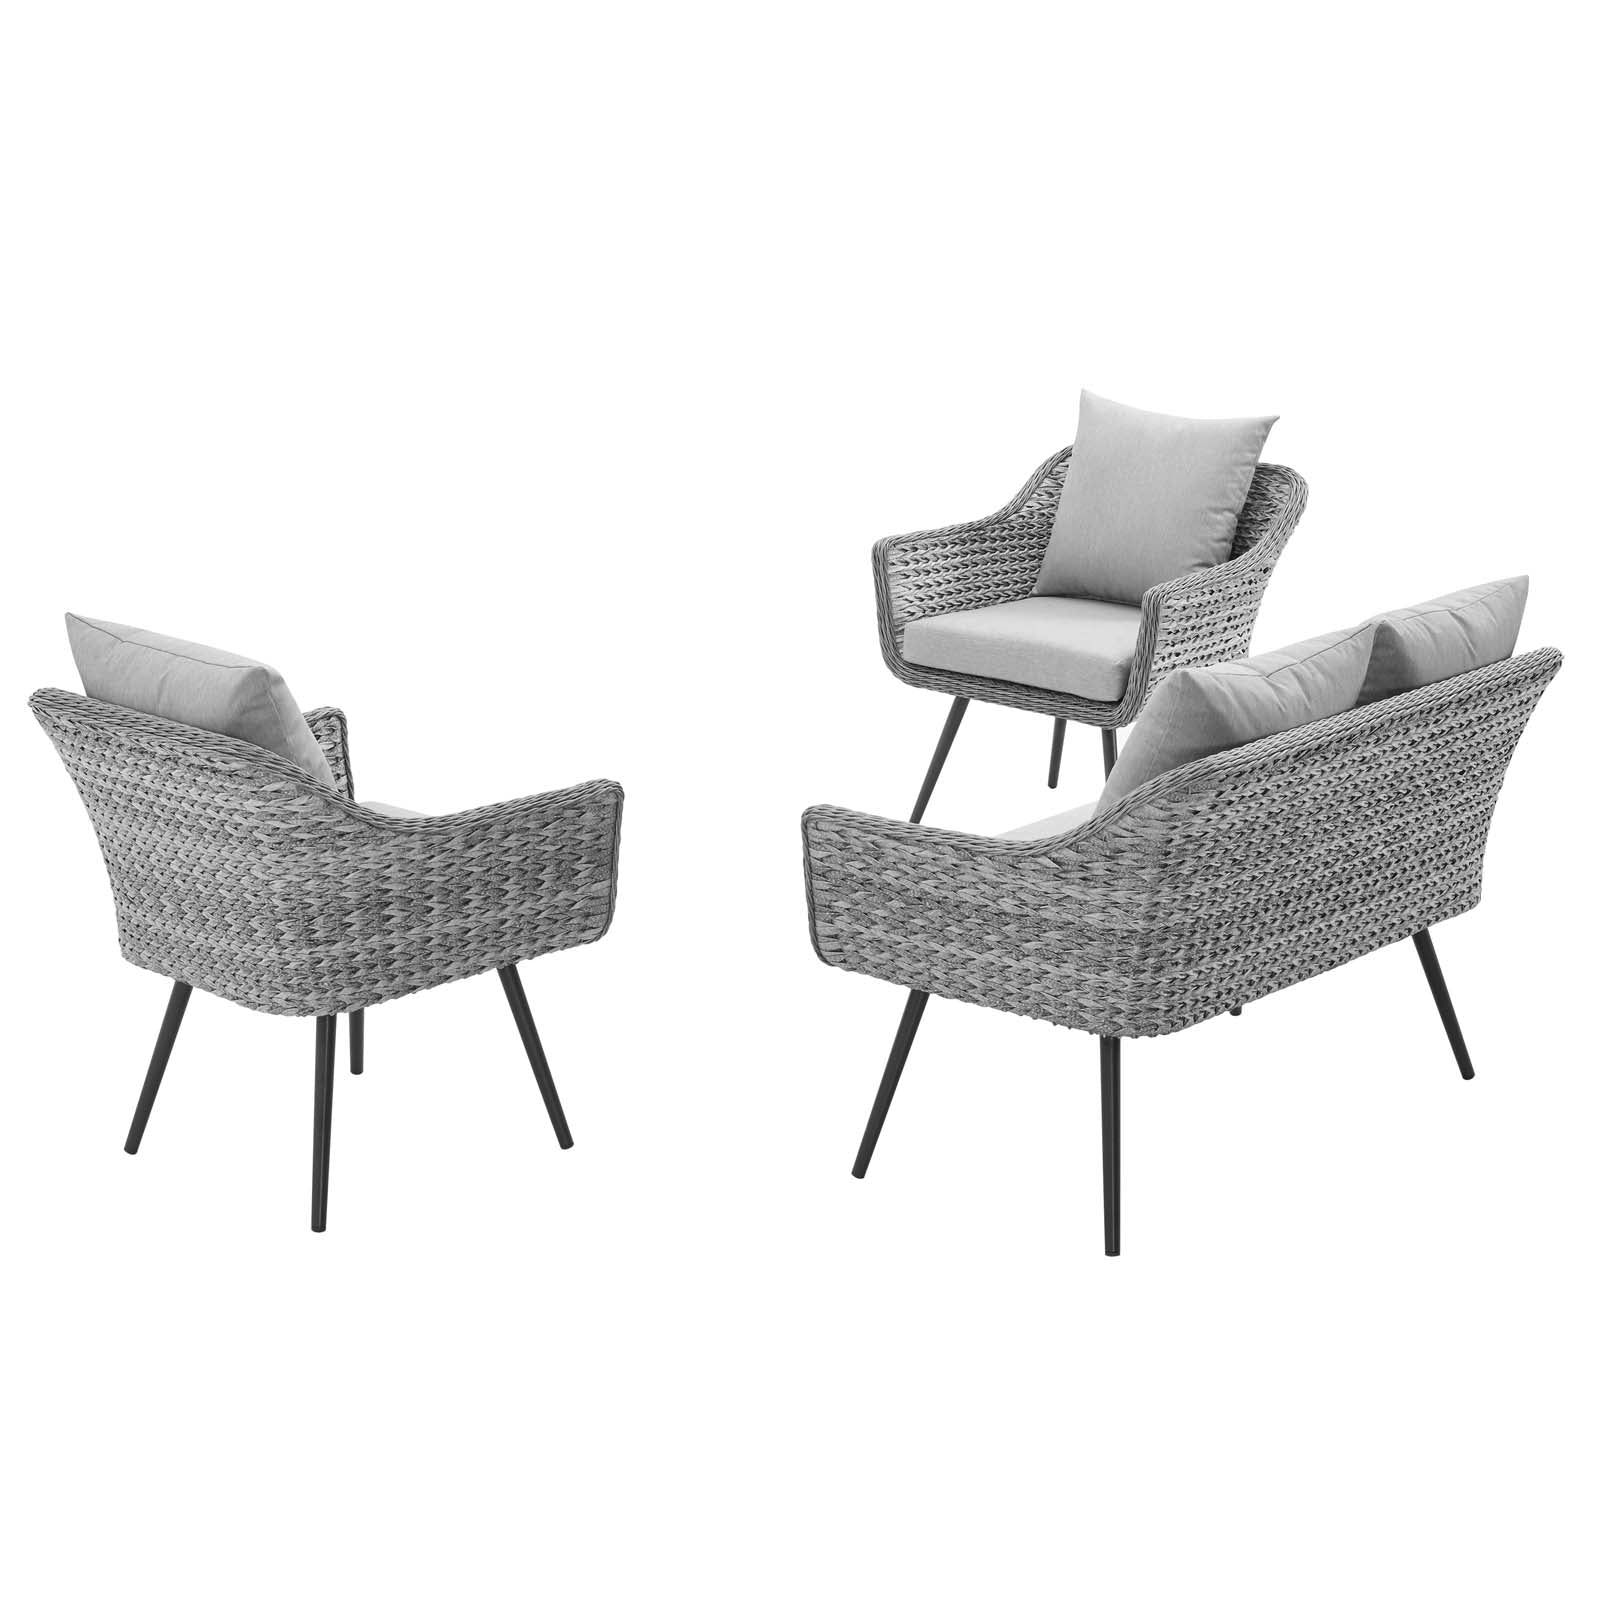 Endeavor 3 Piece Outdoor Patio Wicker Rattan Loveseat and Armchair Set-Outdoor Set-Modway-Wall2Wall Furnishings